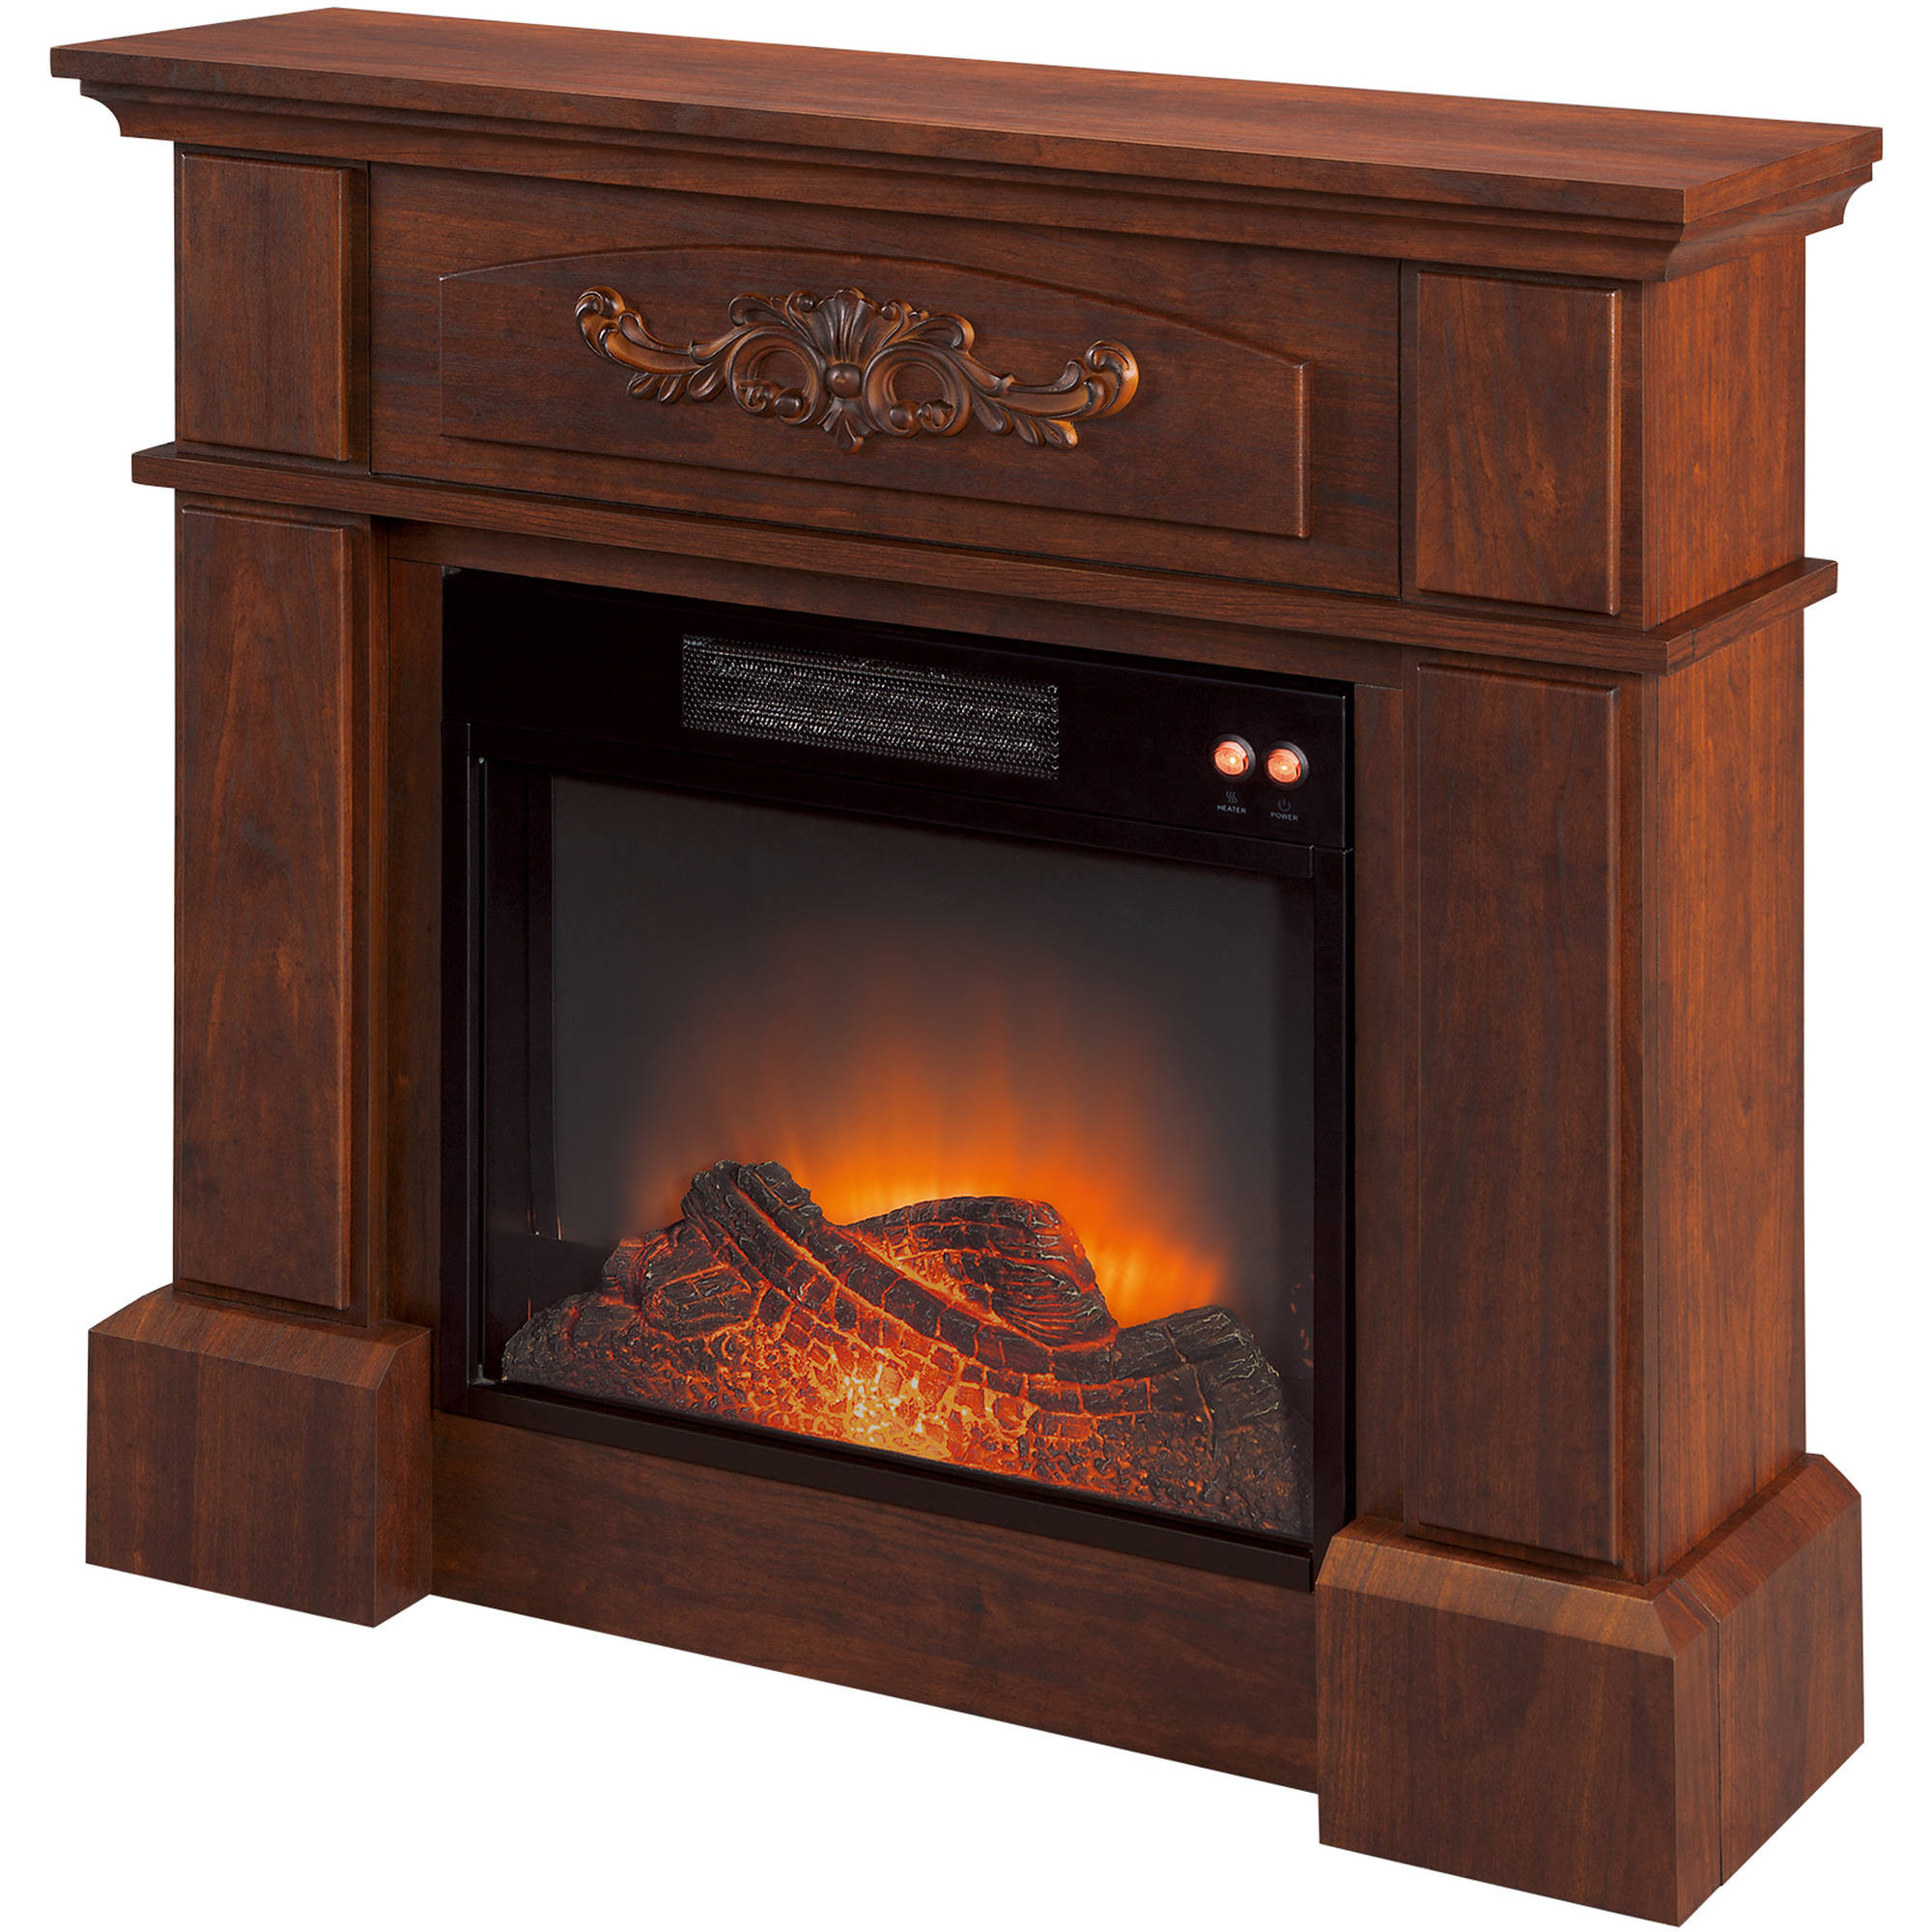 Electric Fireplace Insert At Lowes
 Inspirations Electric Fireplace Tv Stand Lowes For